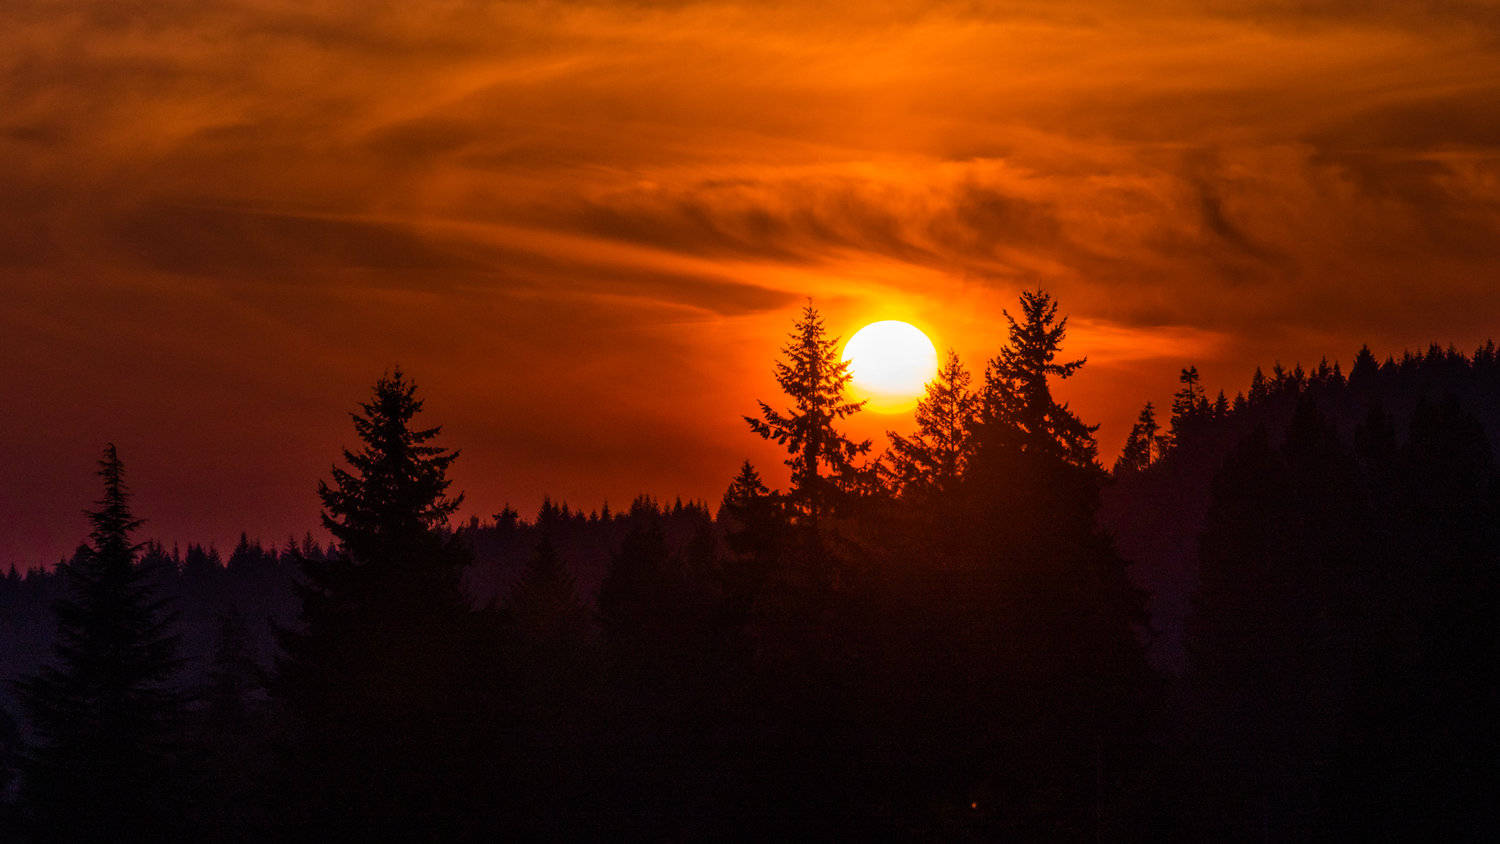 The sun sets in this photo captured in Chehalis earlier this month.